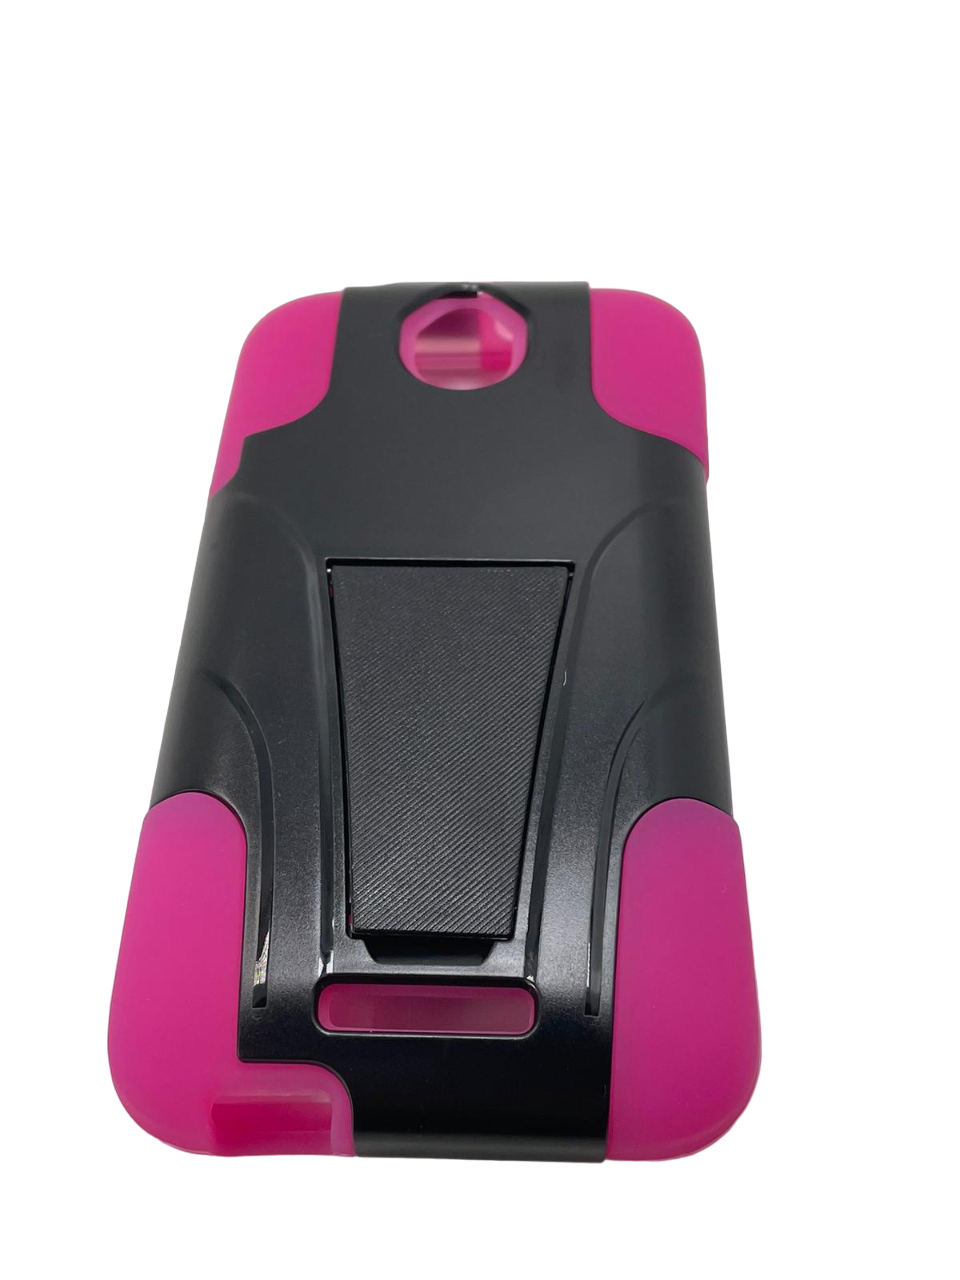 Hybrid Protective Case with Stand for HTC Desire 510 - Hot Pink/Black Unbranded D510-ABKPK - фотография #7